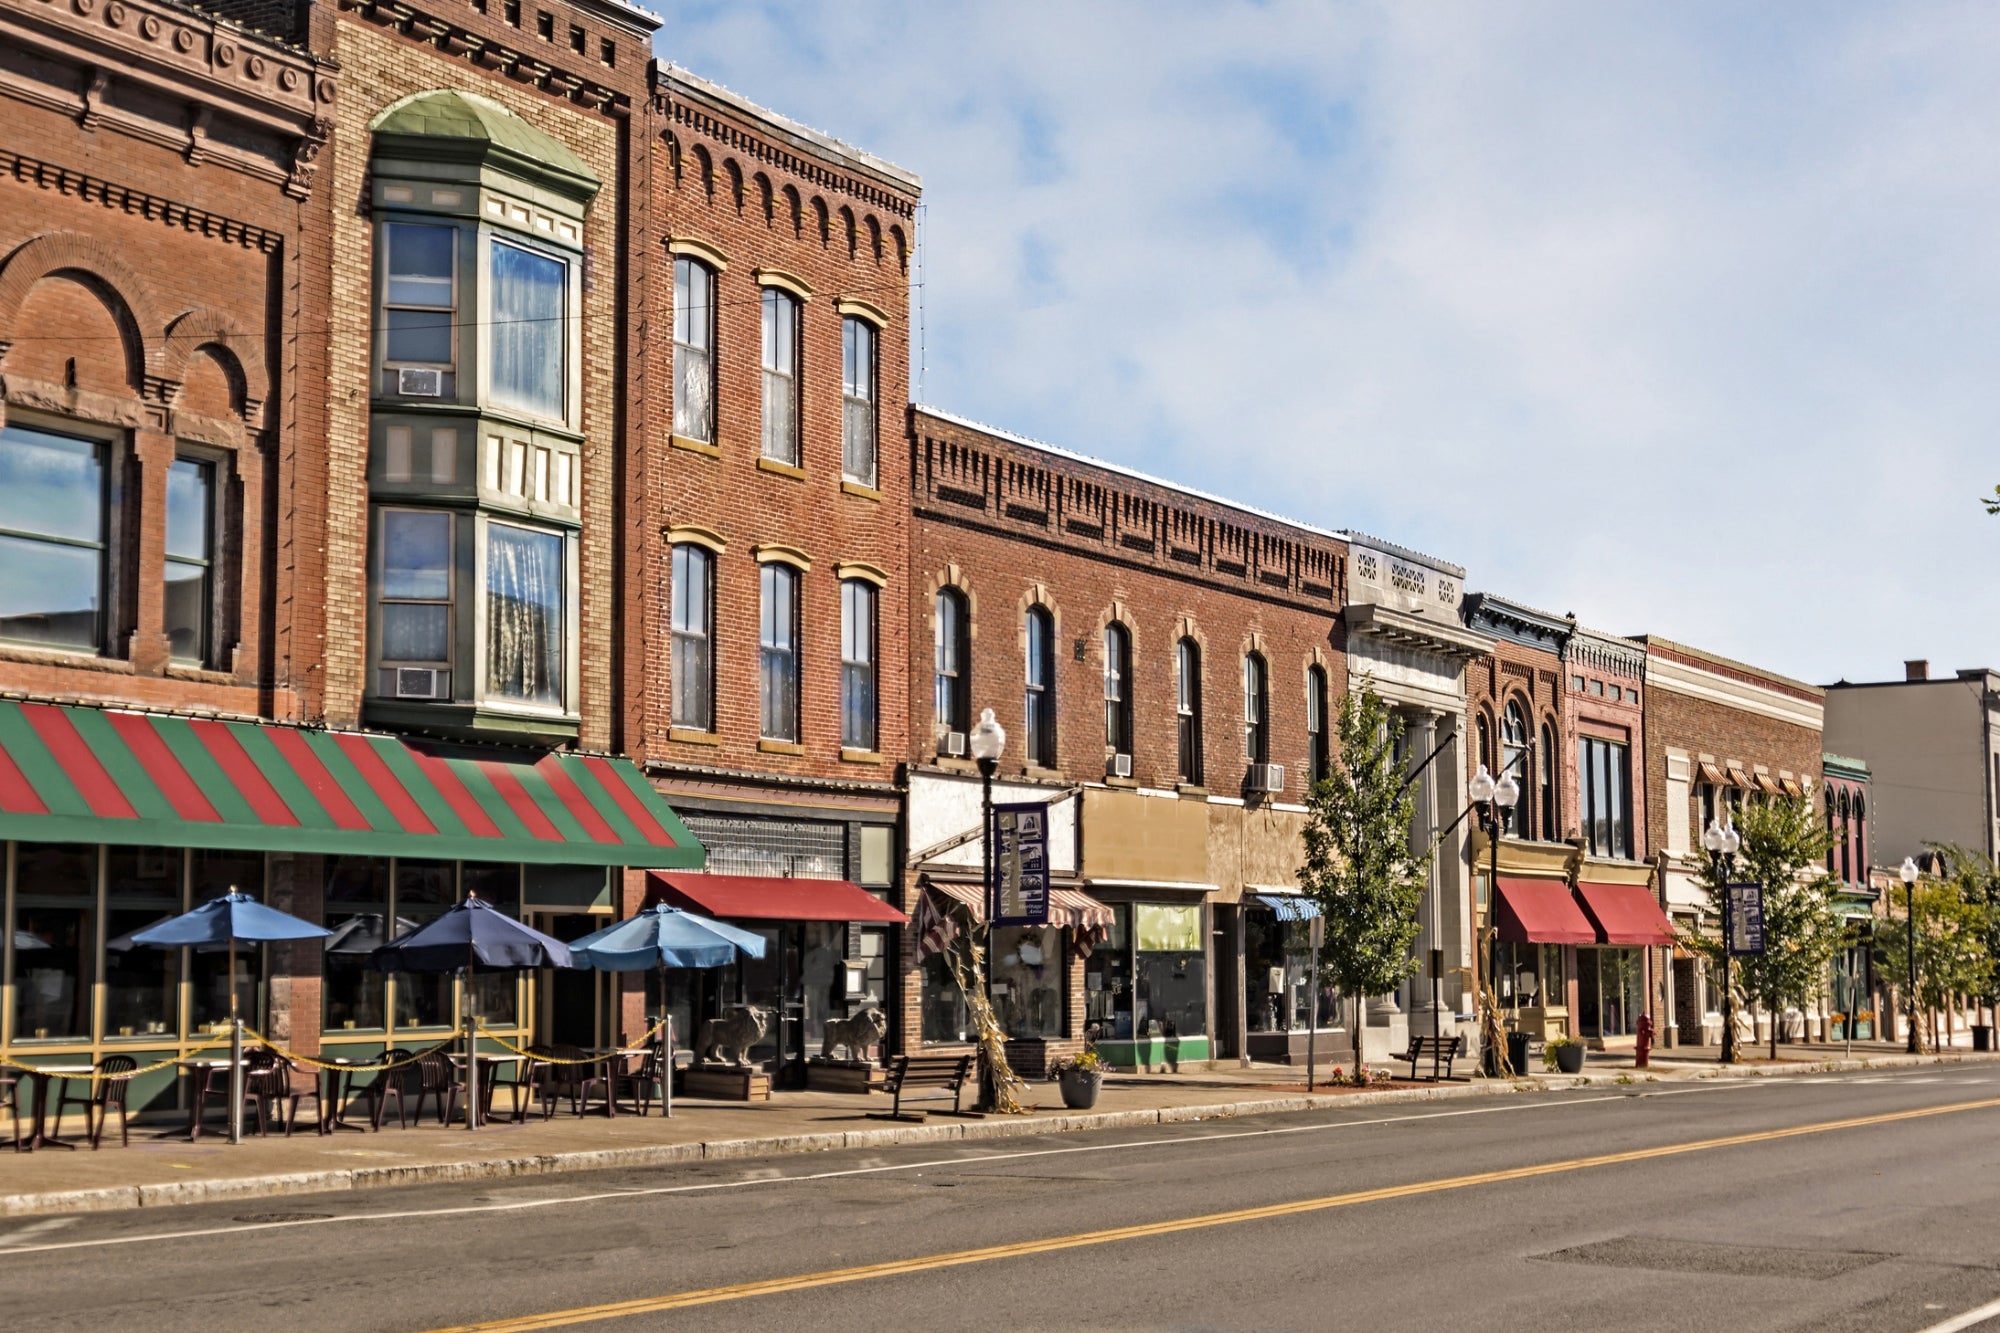 Say Hello to the Next Business Hub: Small Towns